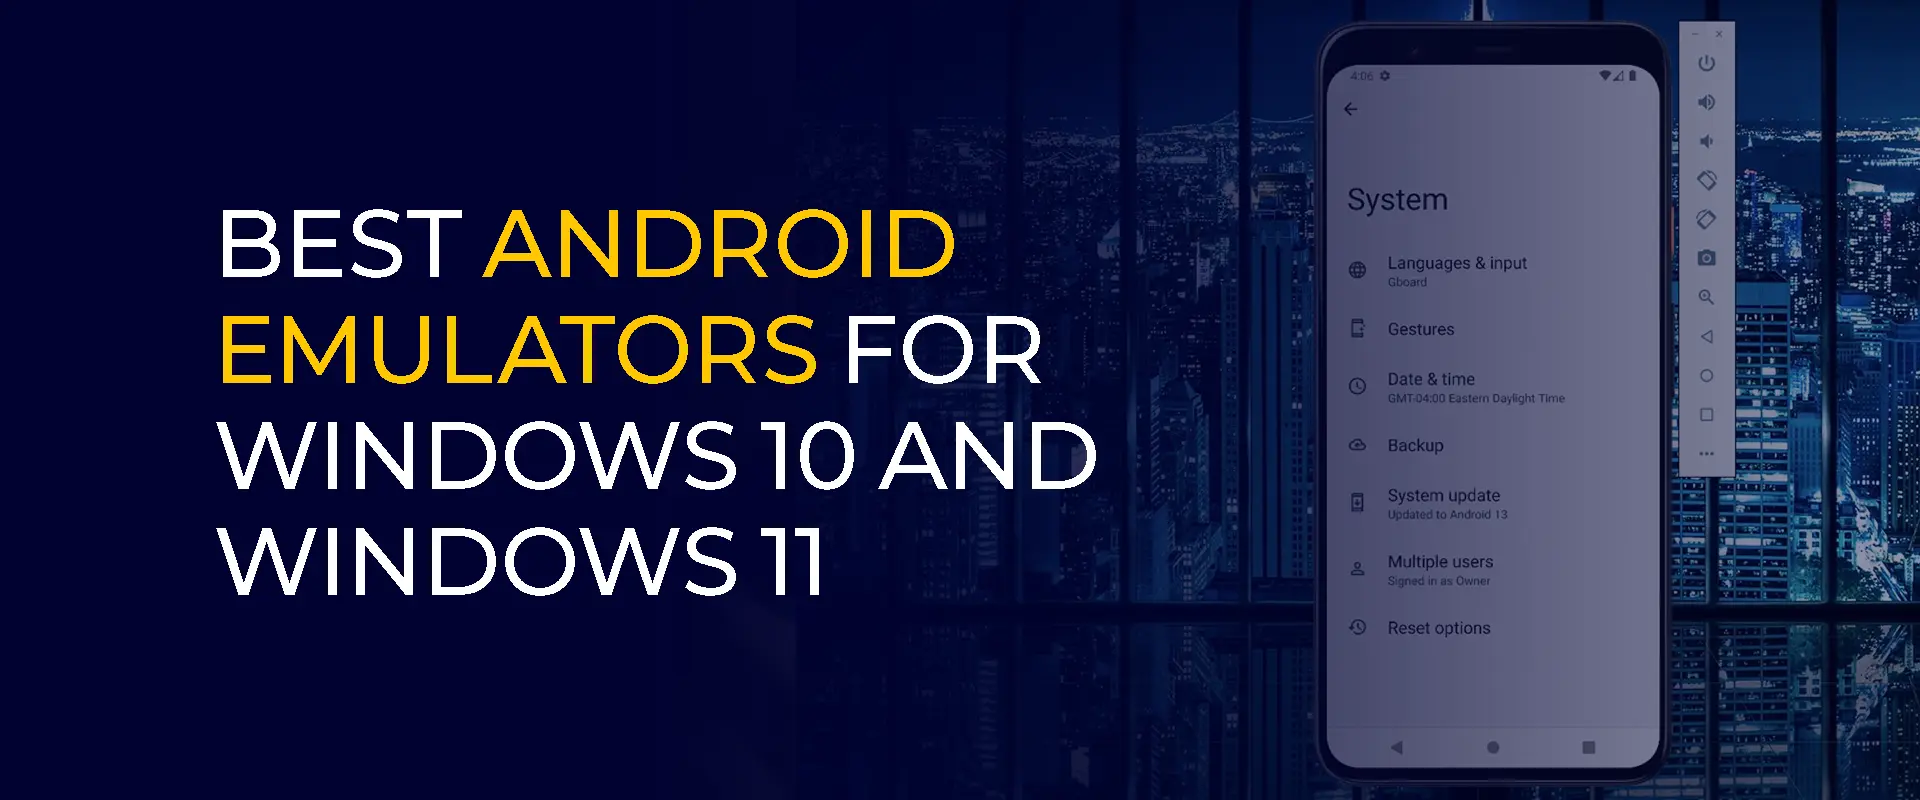 Best Android Emulators for Windows 10 and Windows 11